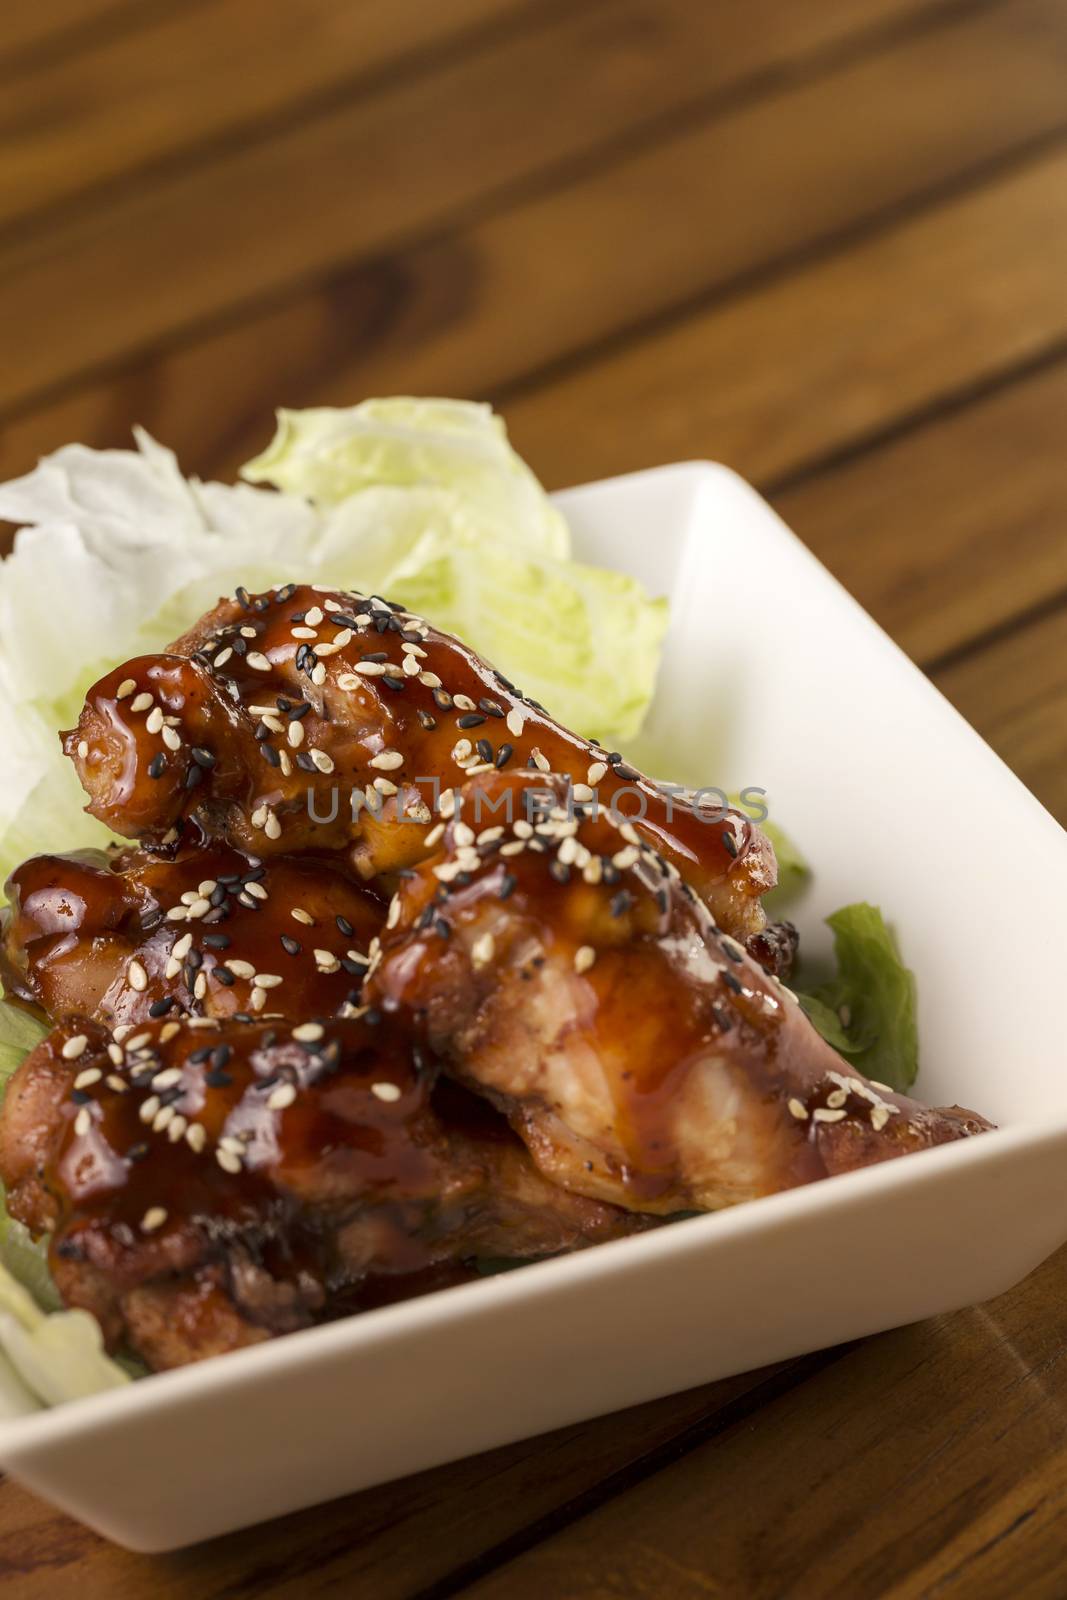 Barbecue buffalo wings with sesame sauce ready to be served.